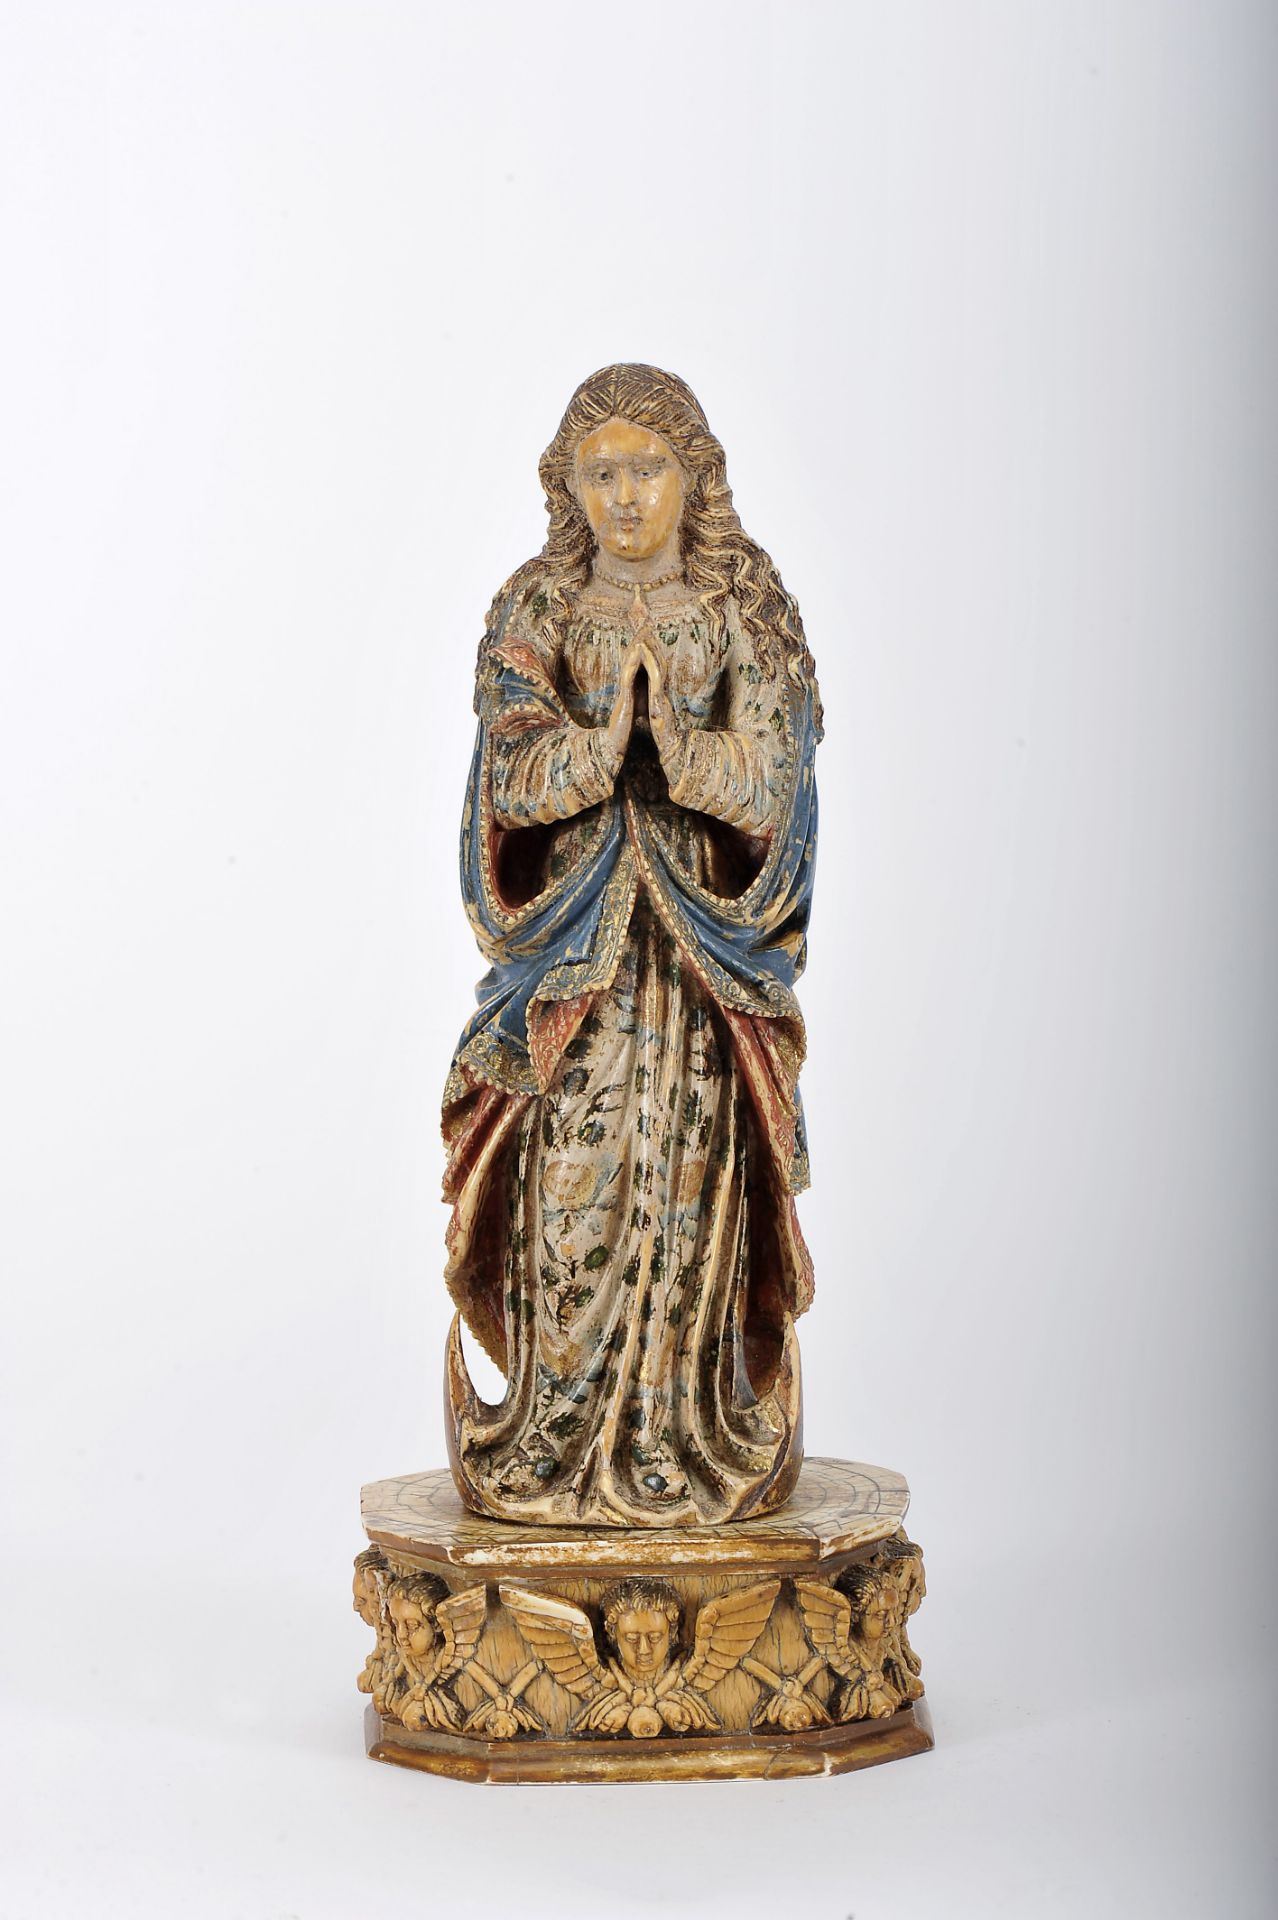 Our Lady of The Immaculate Conception